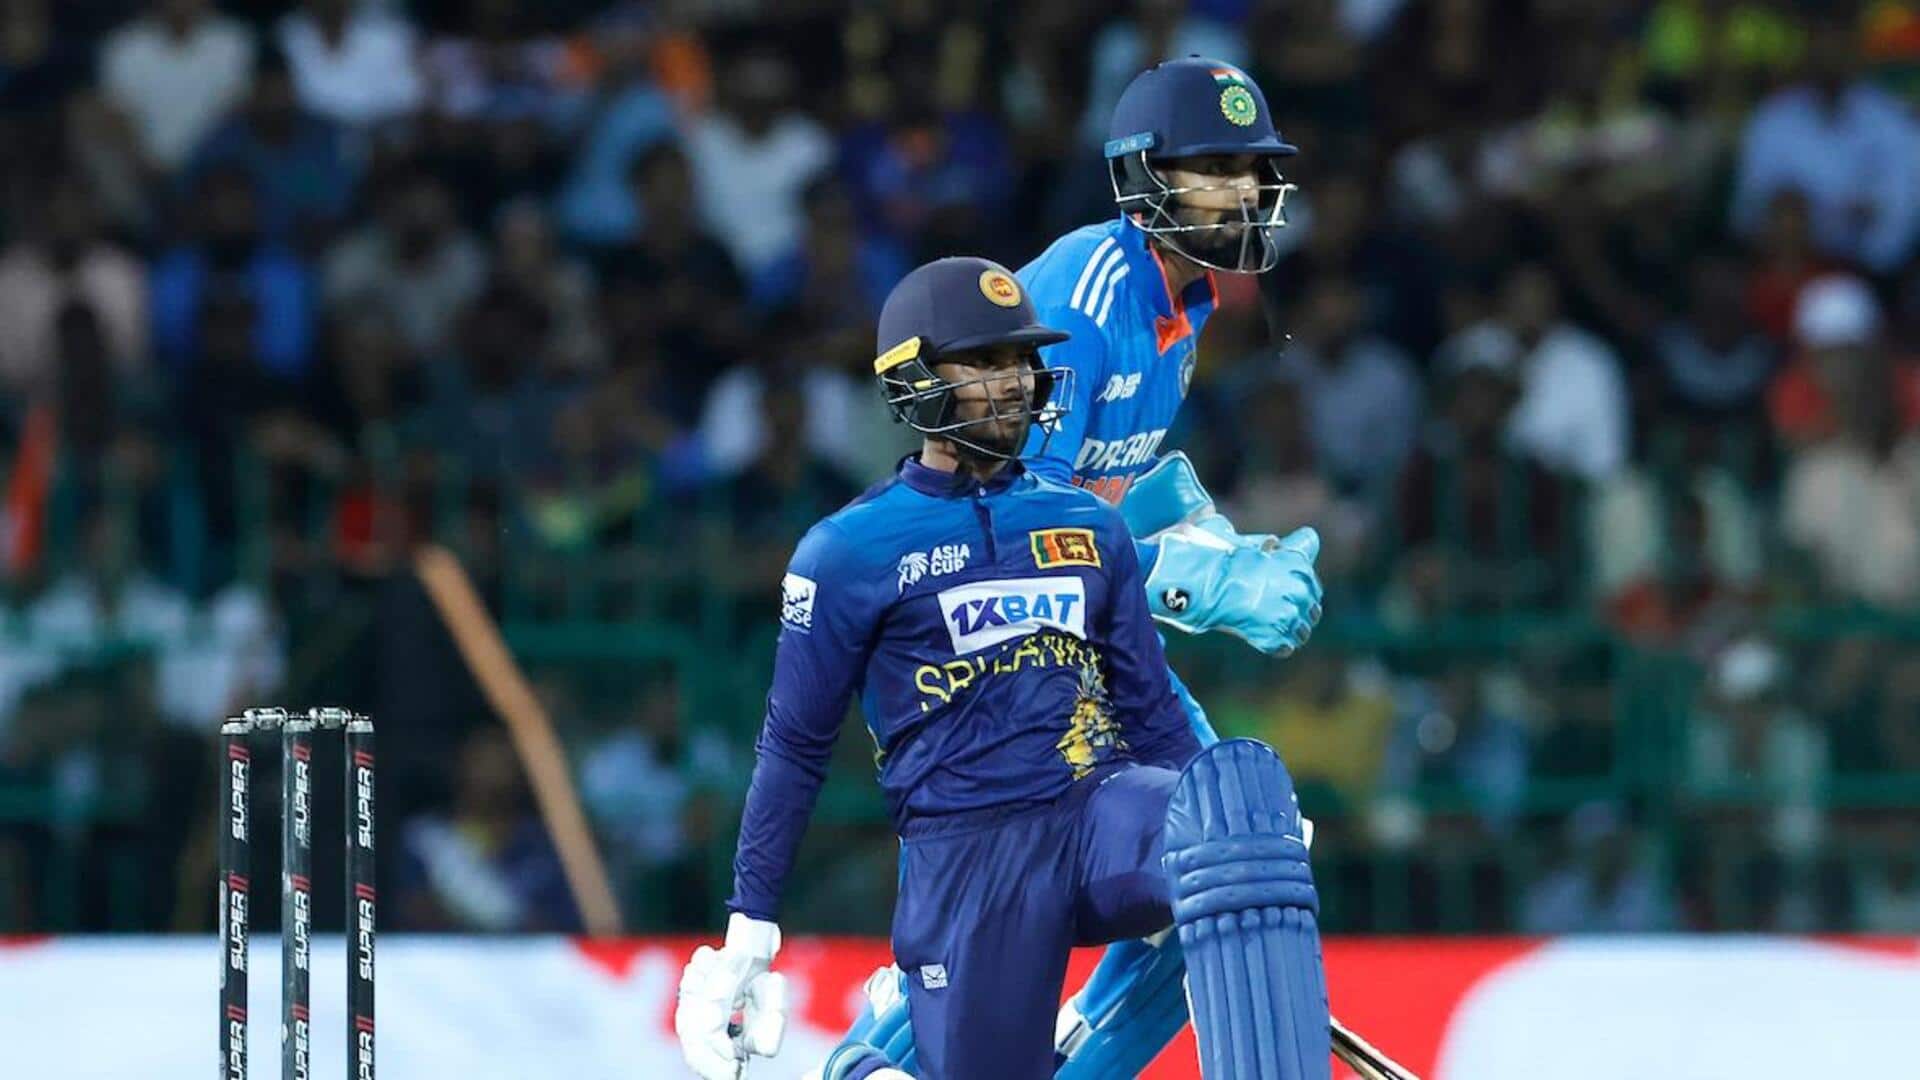 ICC Cricket World Cup: Decoding Sri Lanka's stats and records